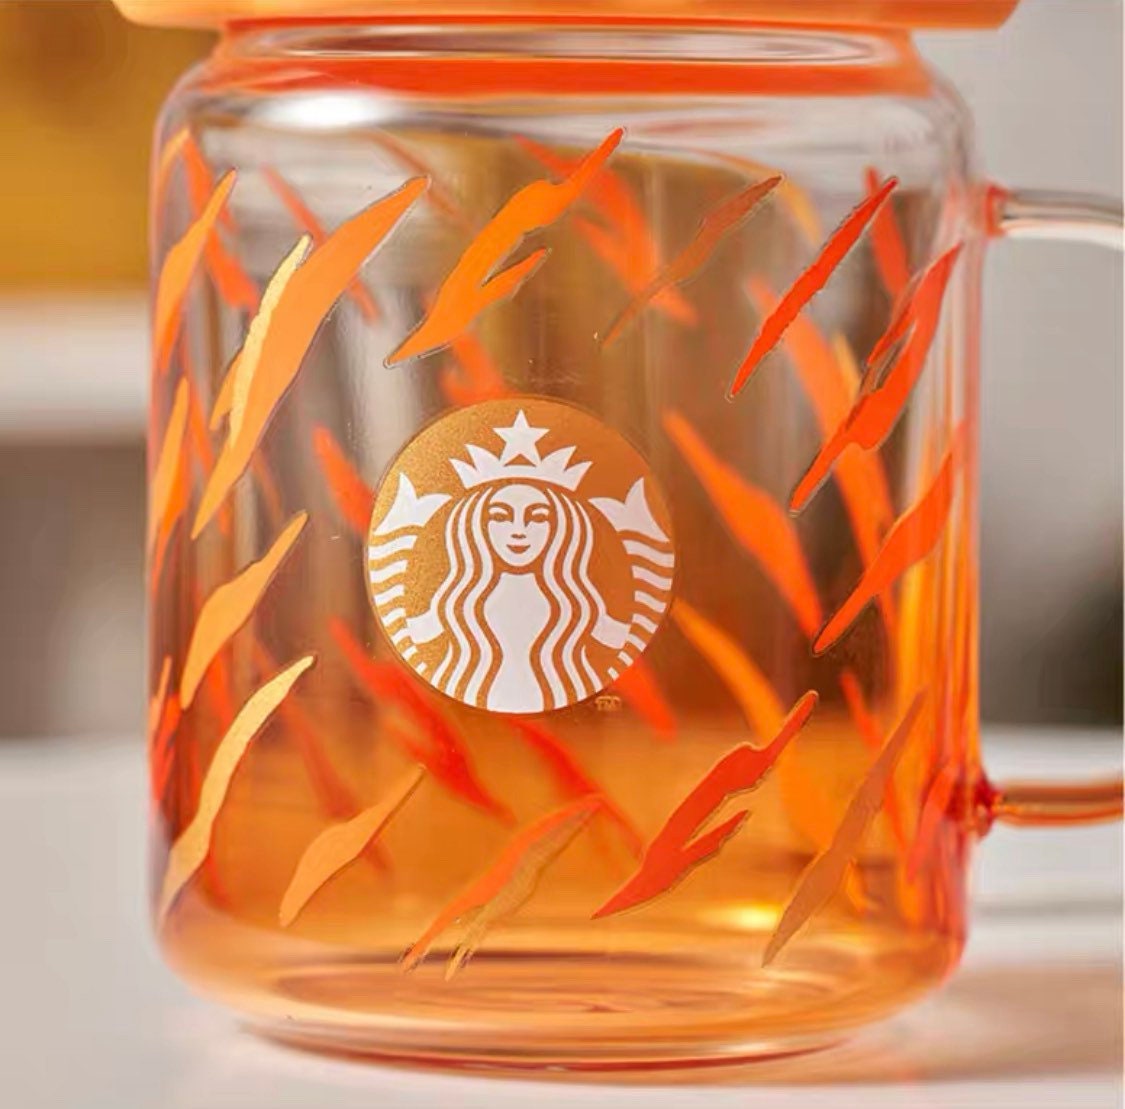 Starbucks China 525ml 2022 new year cute tiger series tiger stripes glass cup with tiger claw cup cover